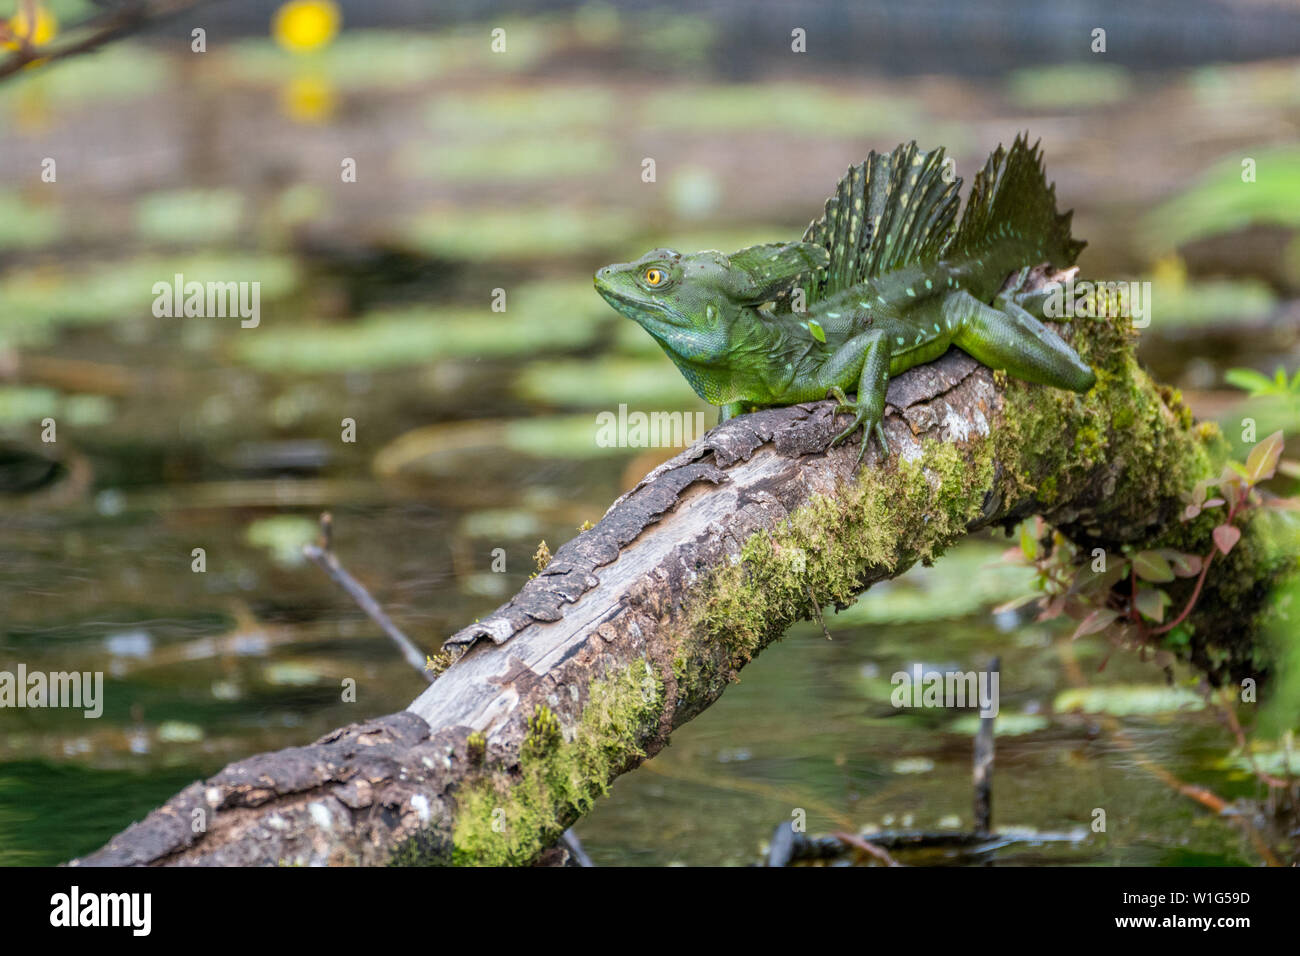 A male plumed basilisk, also known as green basilisk or Jesus Christ lizard, rests on a wooden log in Maquenque, Costa Rica. Stock Photo